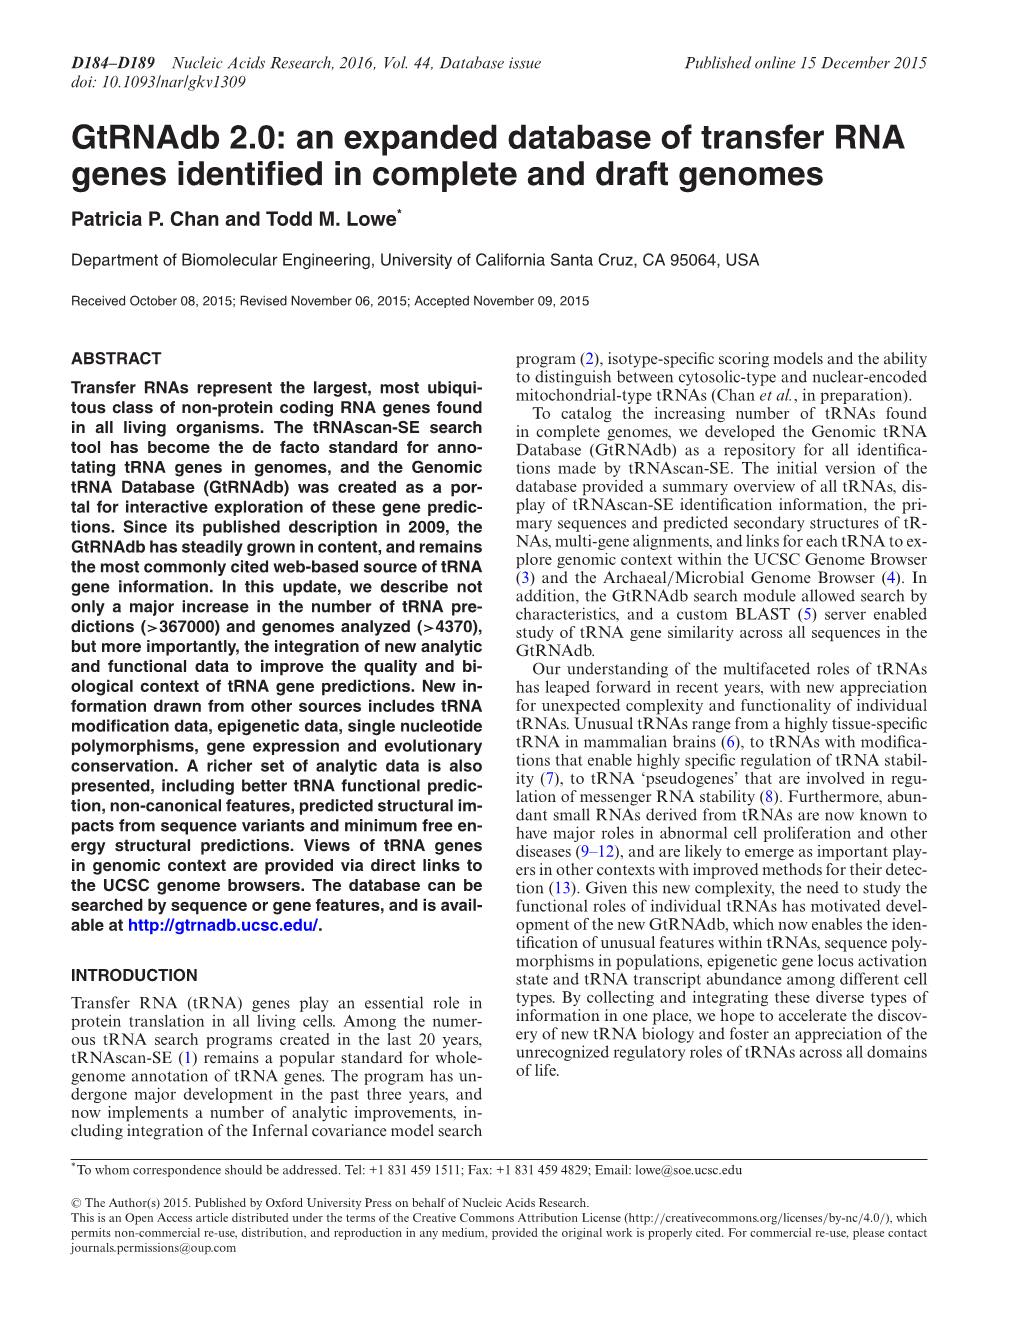 Gtrnadb 2.0: an Expanded Database of Transfer RNA Genes Identified in Complete and Draft Genomes